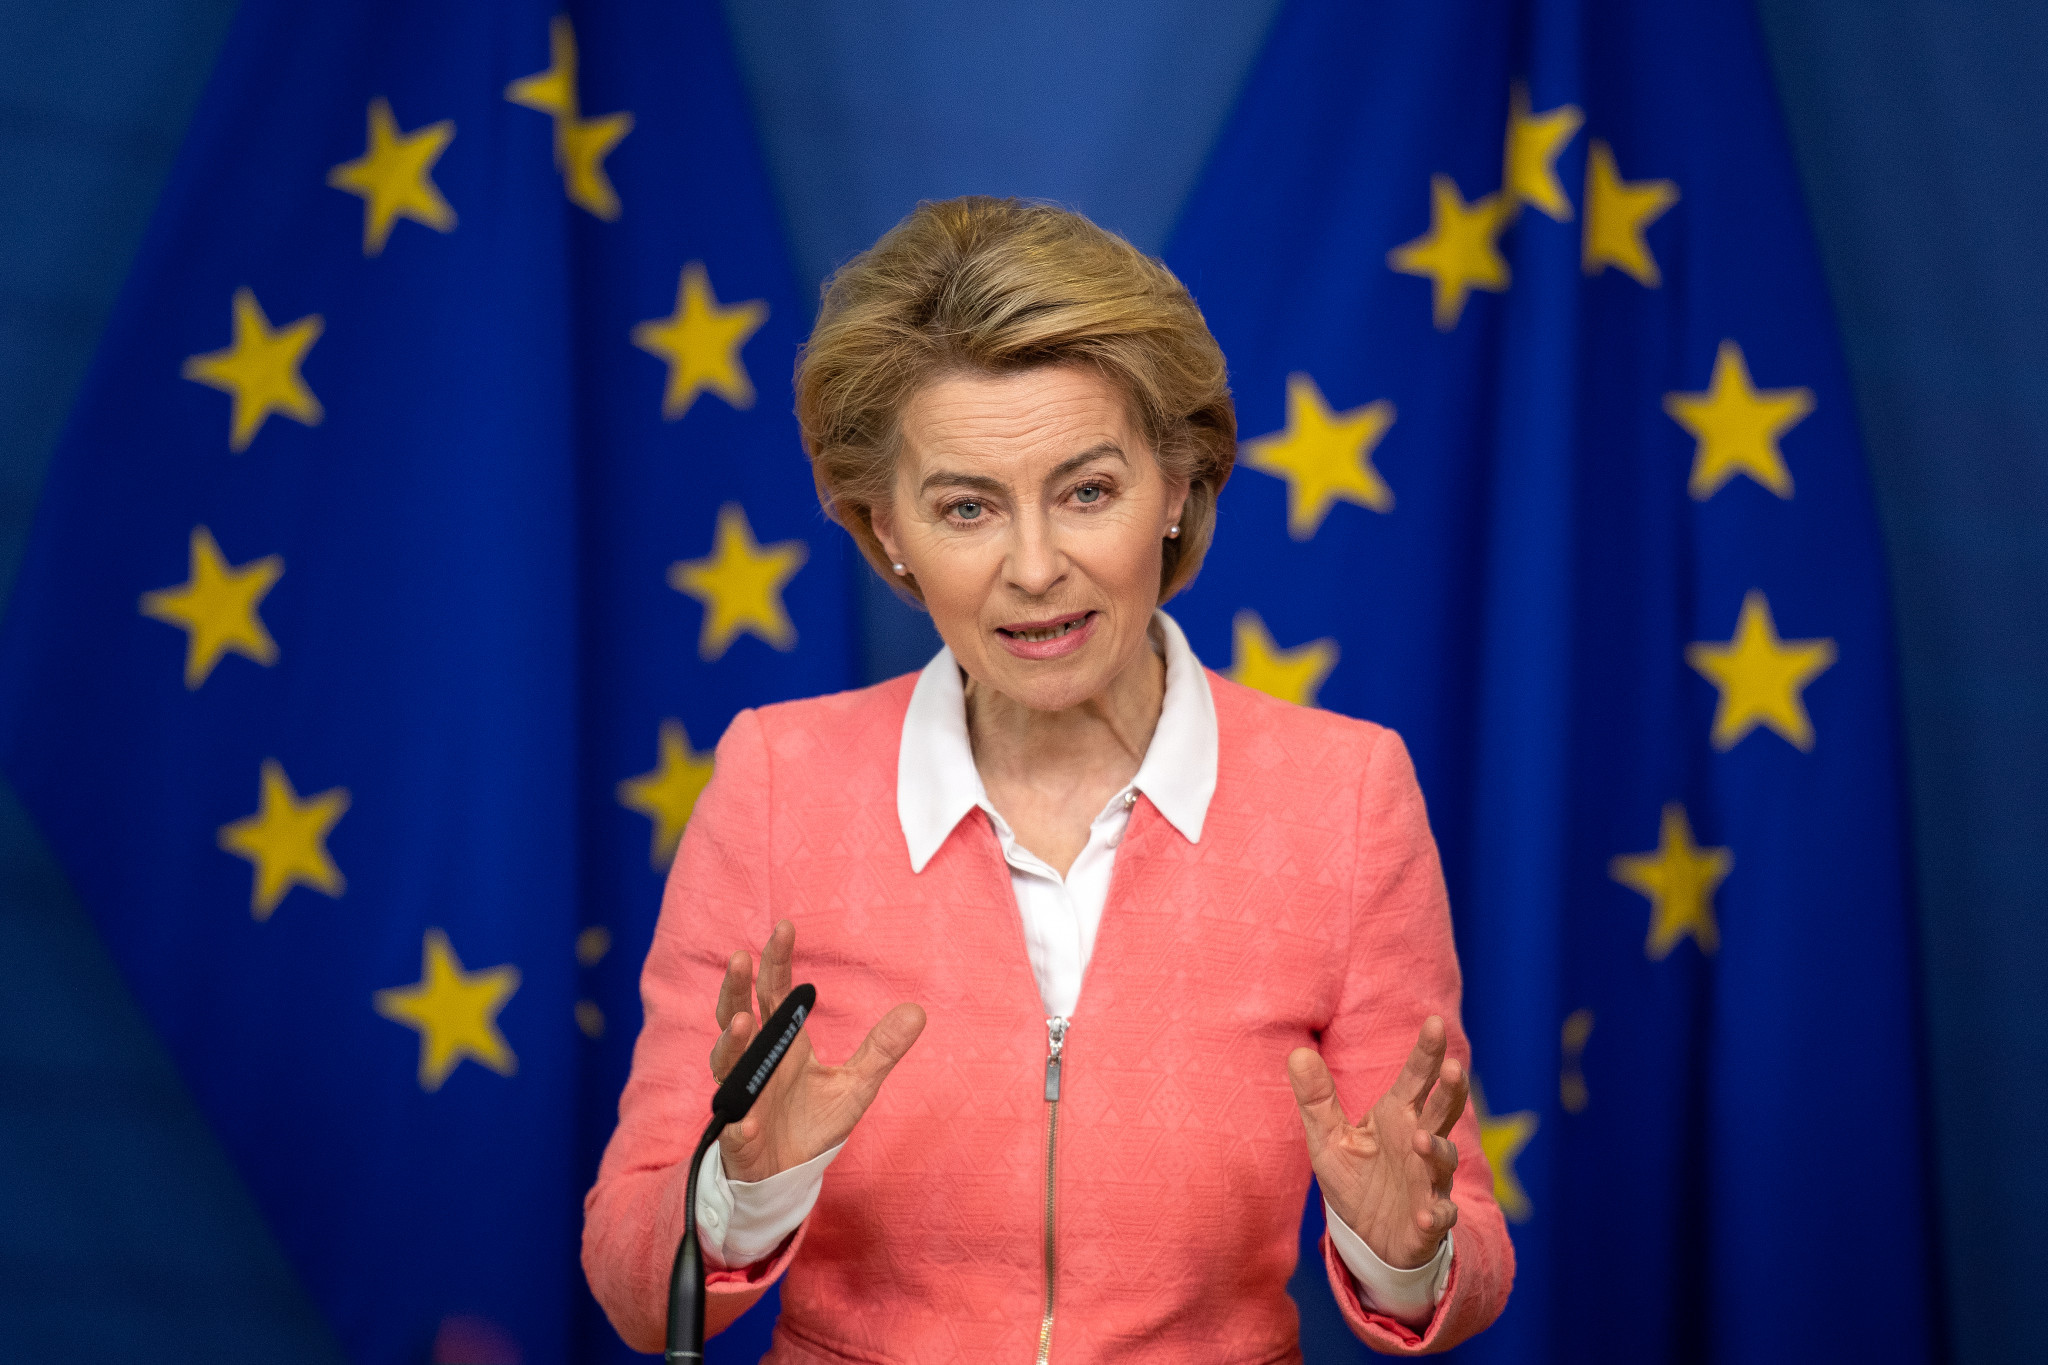 Ursula von der Leyden is the current President of the European Commission ©Getty Images